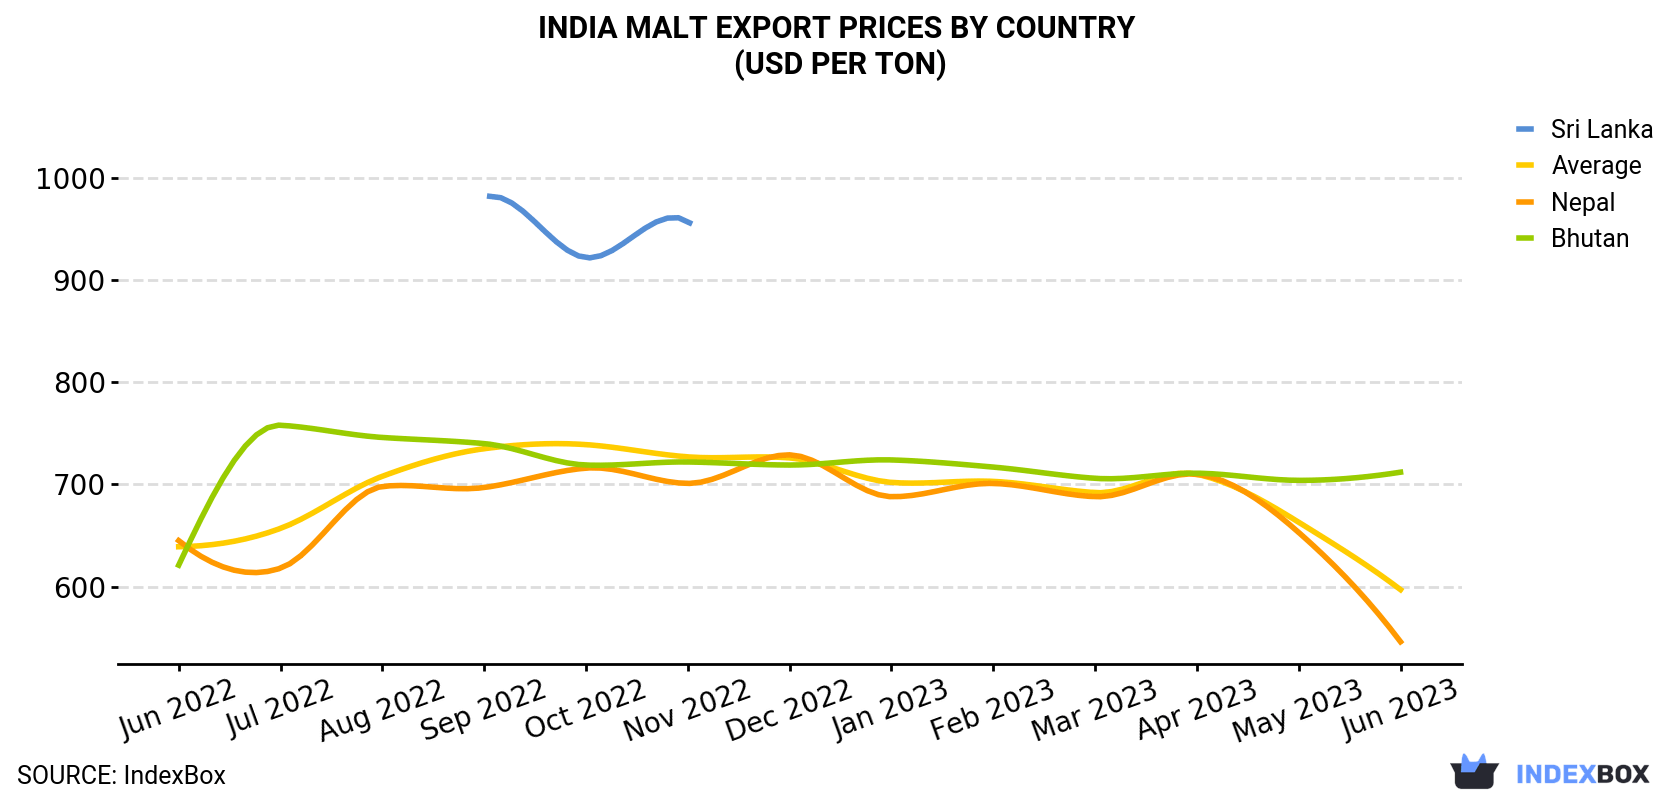 India Malt Export Prices By Country (USD Per Ton)